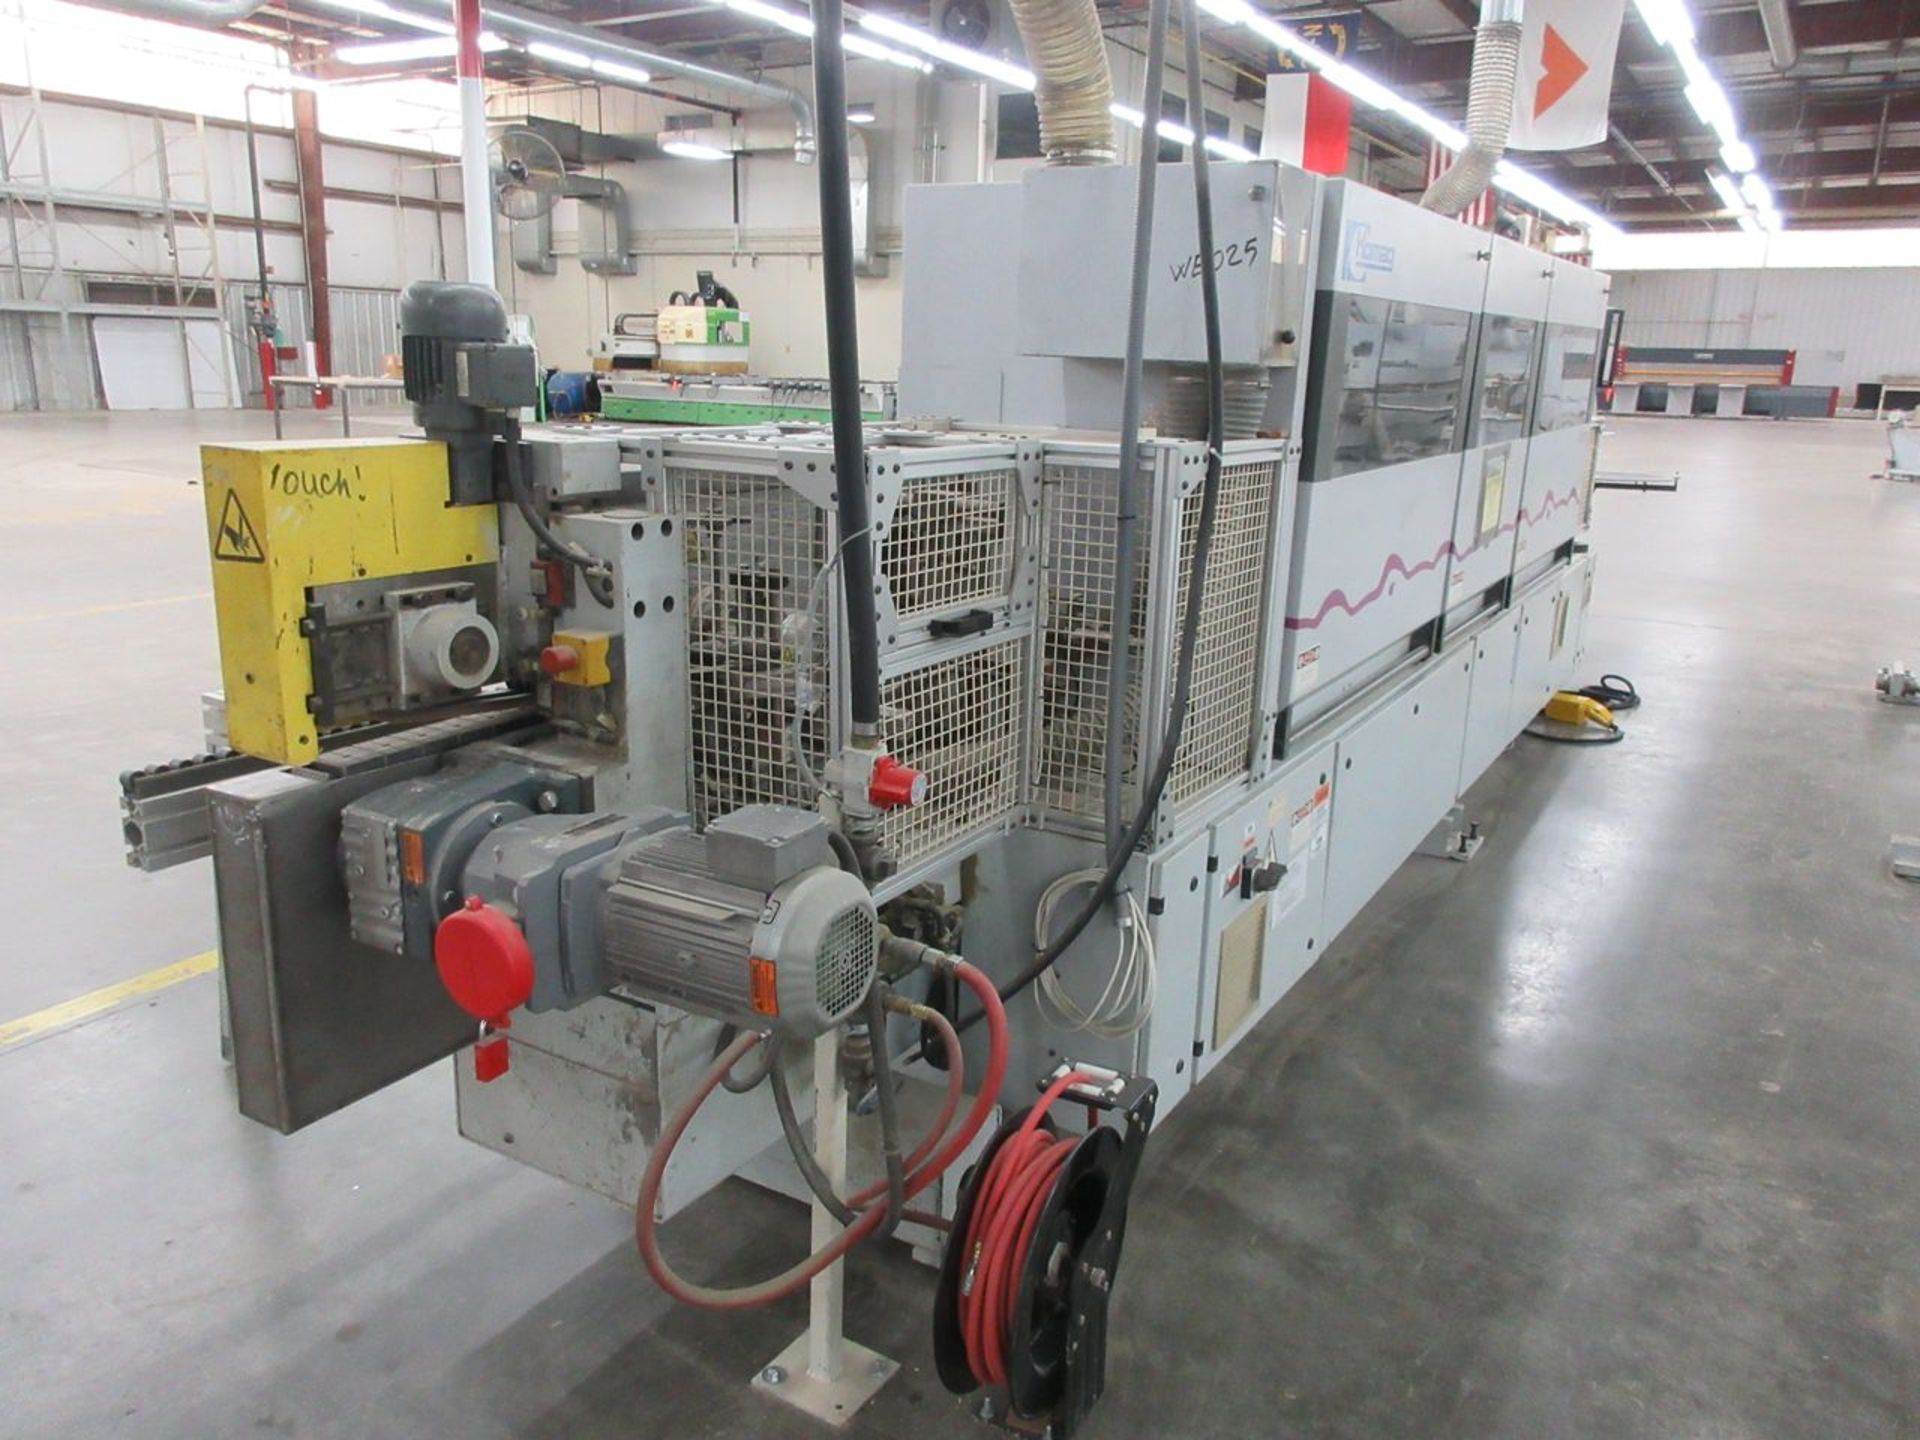 Homag KL76/A20 Single End Edge Bander, S/N: 0-200-08-4020 (1999); with Coil Feed Reel, Glue Station, - Image 9 of 13